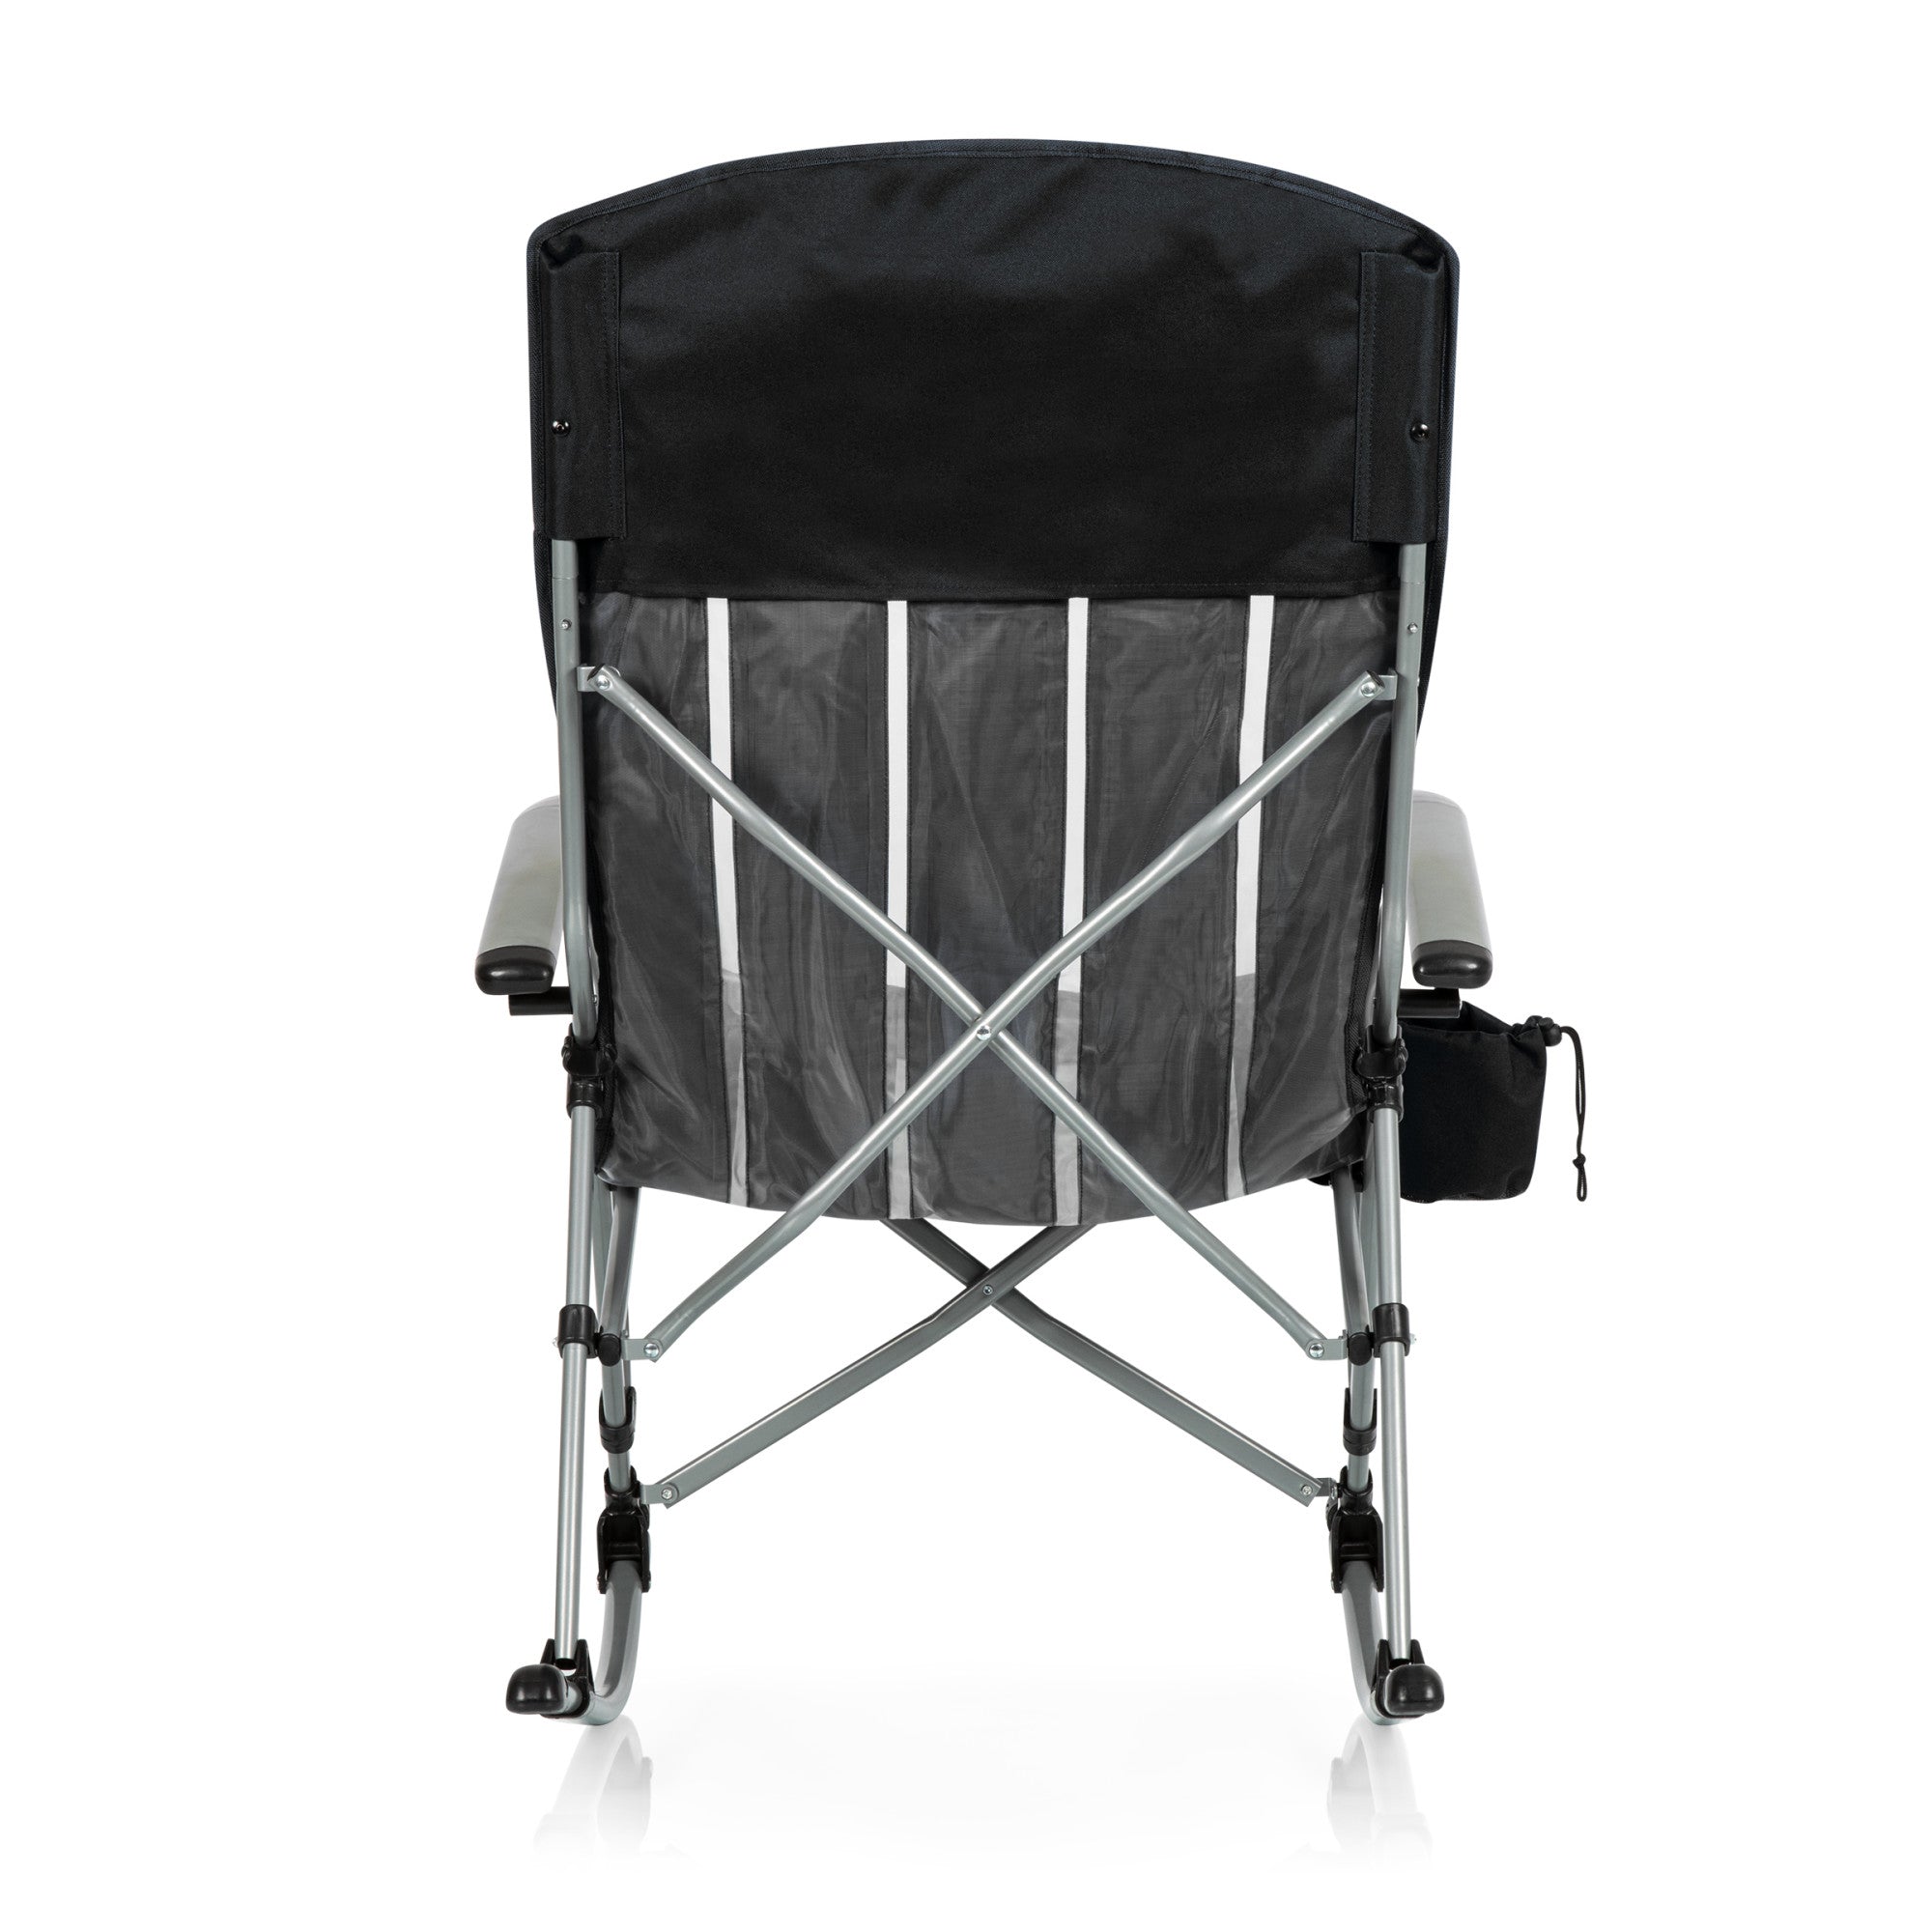 Pittsburgh Steelers - Outdoor Rocking Camp Chair